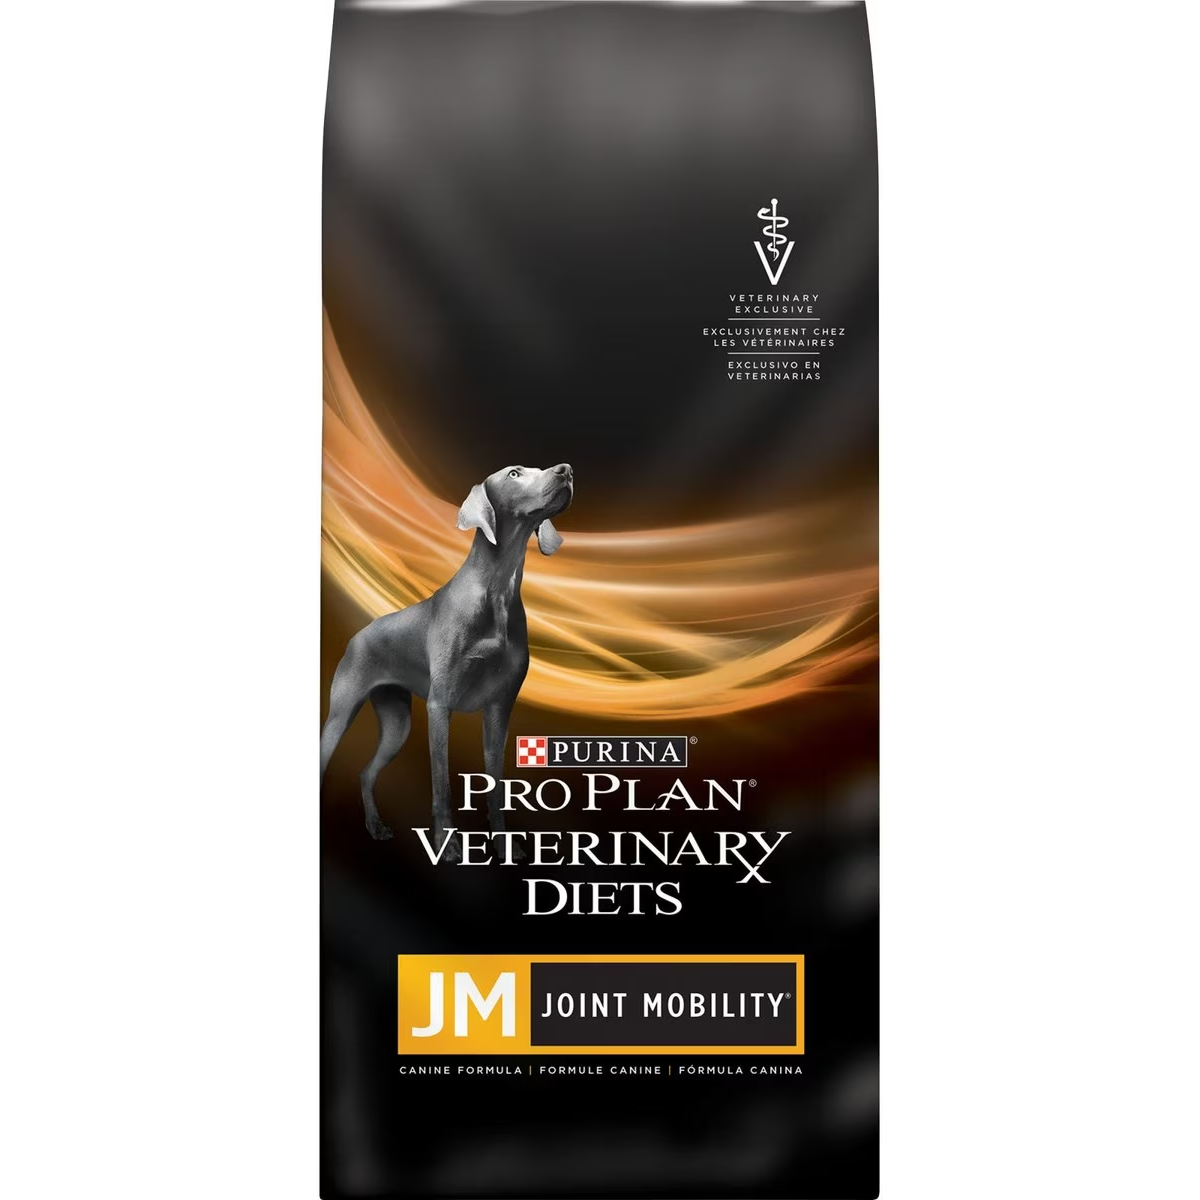 New Project Purina Pro Plan Veterinary Diets JM Joint Mobility Dry Dog Food 